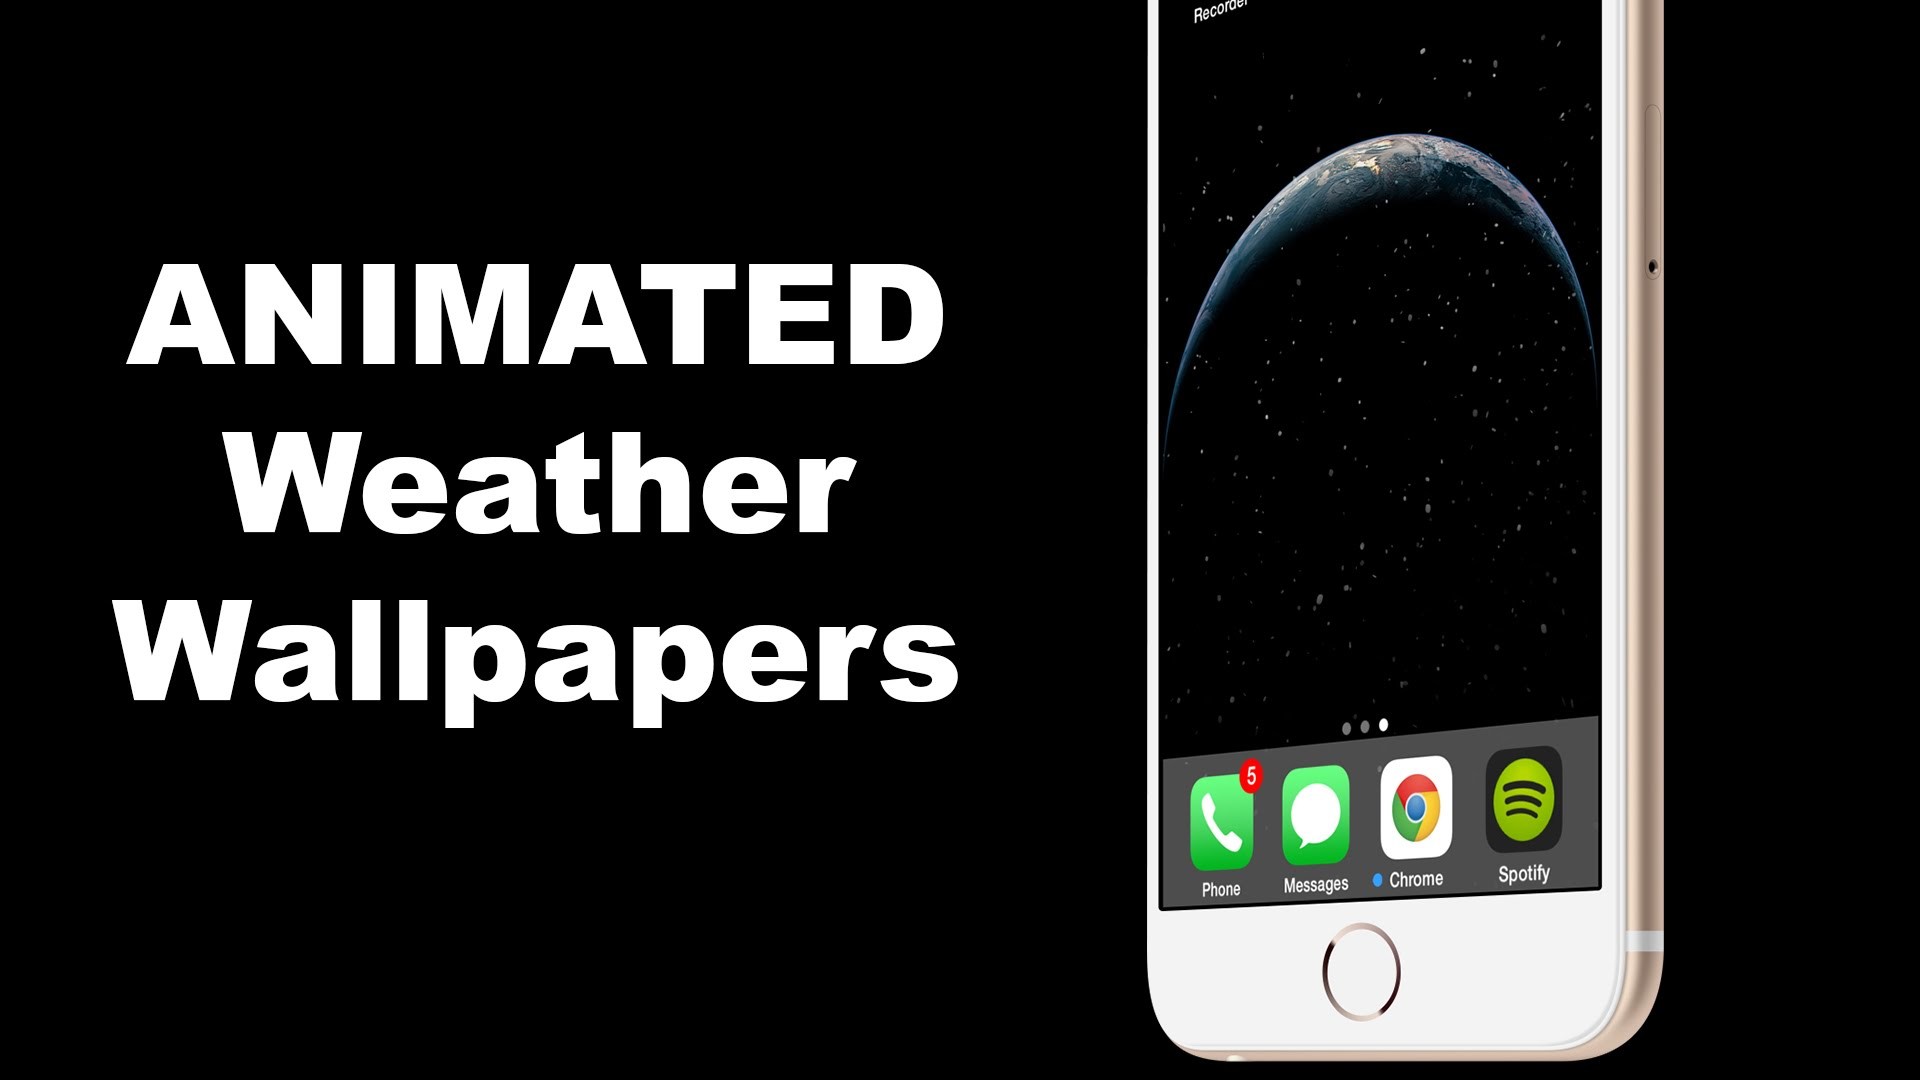 How To Add Changing ANIMATED Weather Wallpapers for iOS 8 and iOS 8.1 – YouTube